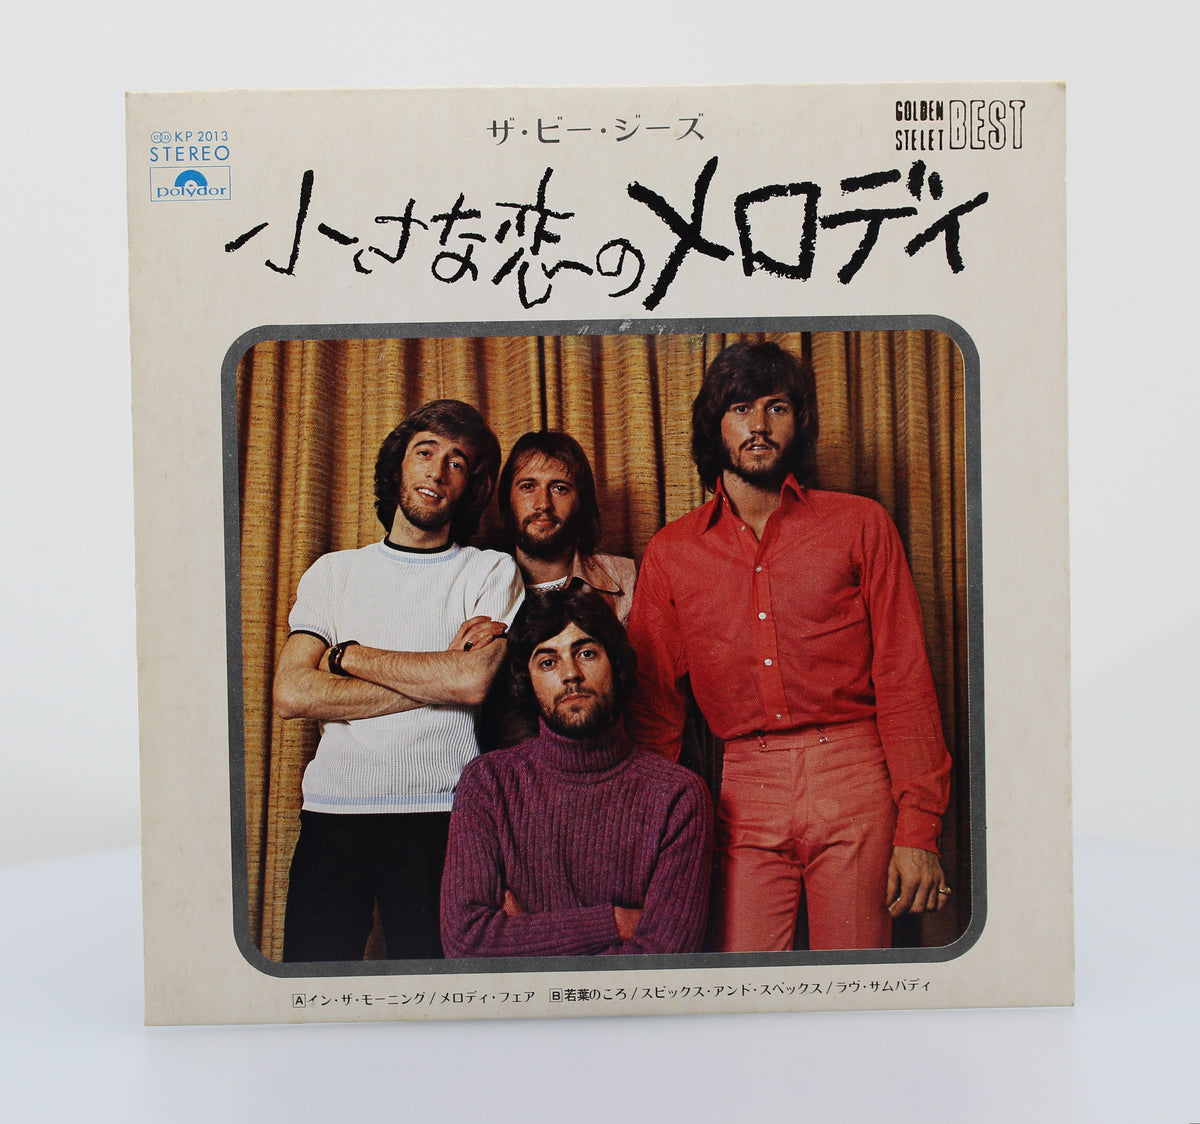 Bee Gees, In The Morning, Vinyl 7&quot; (33⅓), Japan 1972 PROMO